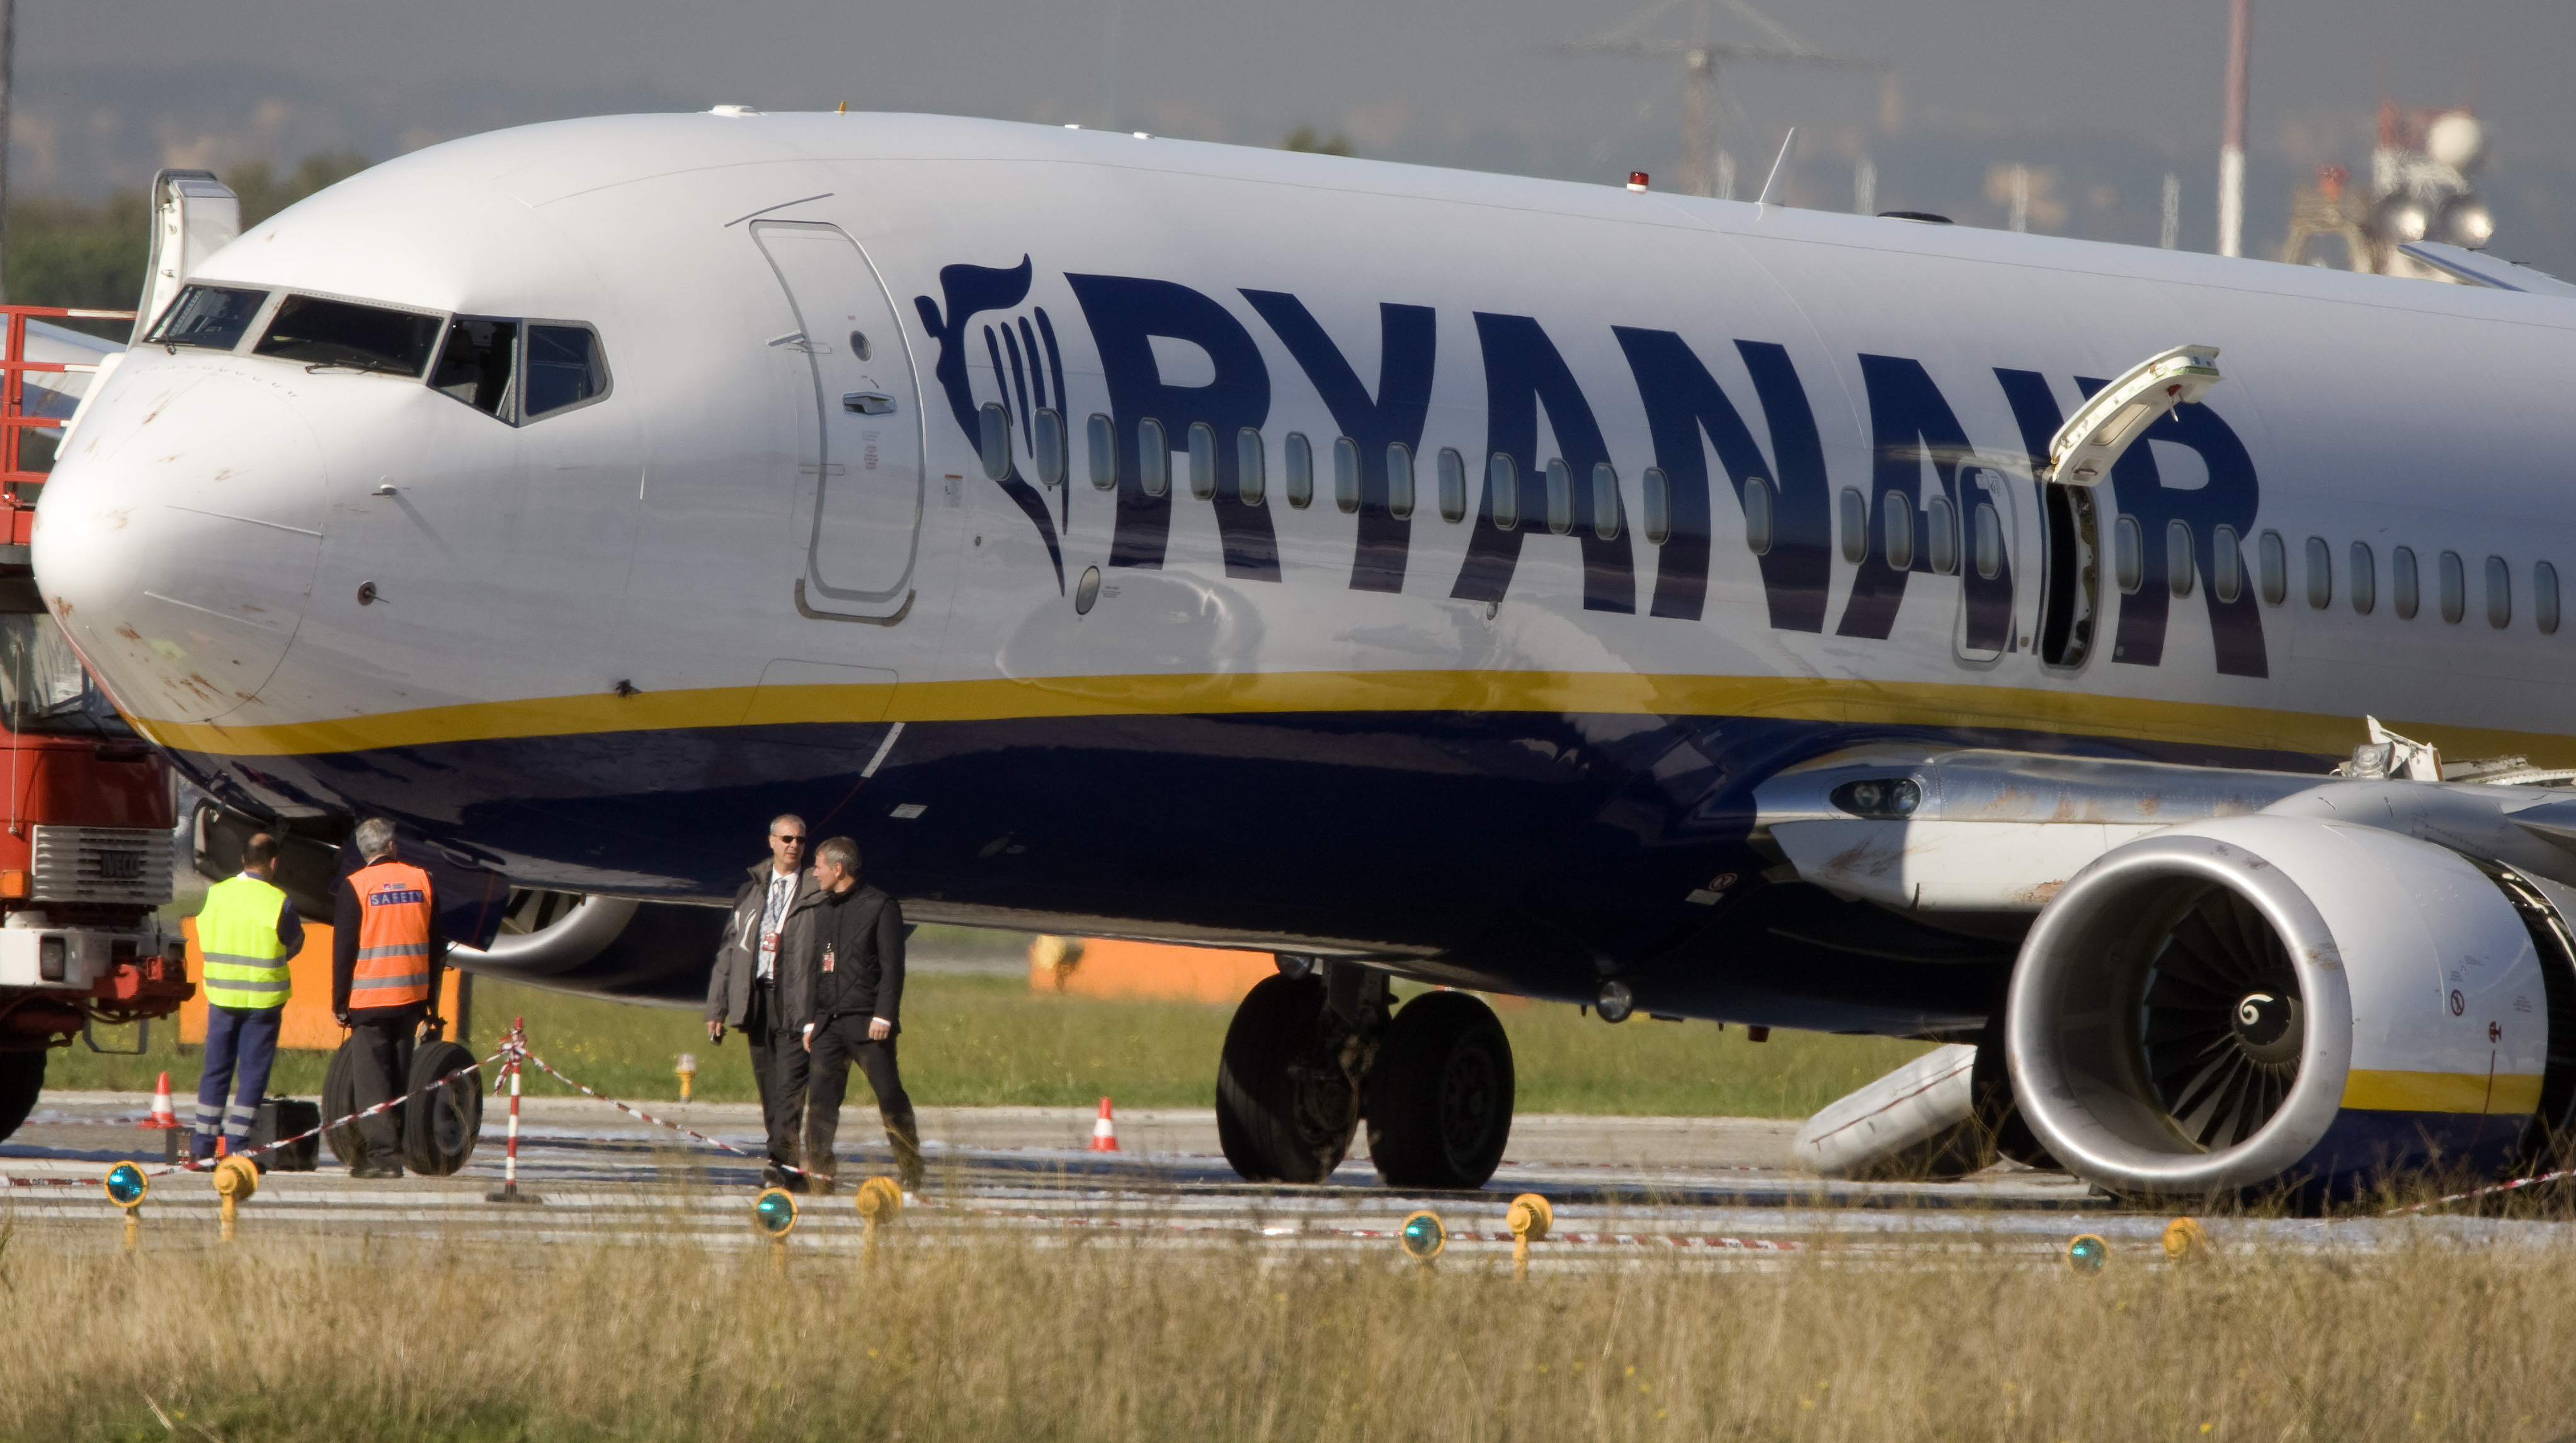 Ryanair jet lies on the runway with collapsed landing gear after an emergency landing at Ciampino airport in Rome